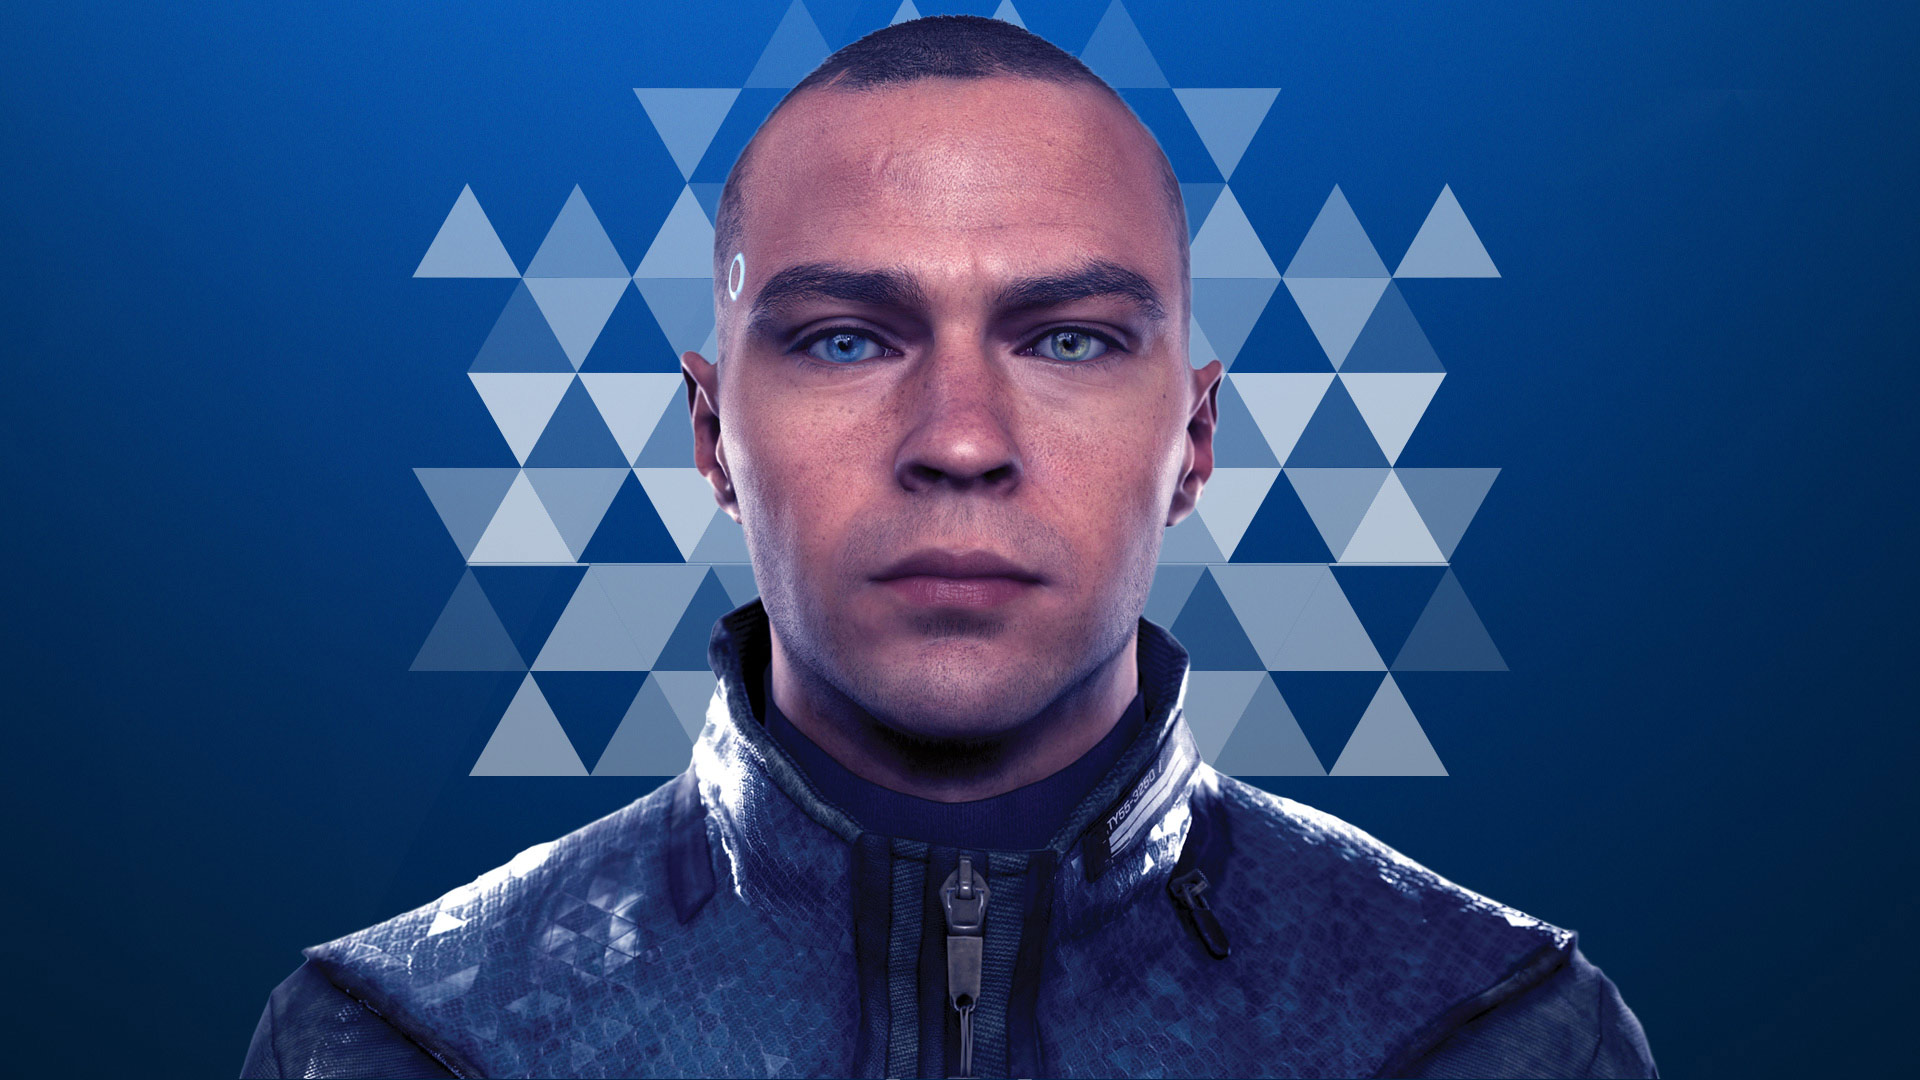 Markus (Detroit: Become Human) HD Wallpapers and Backgrounds